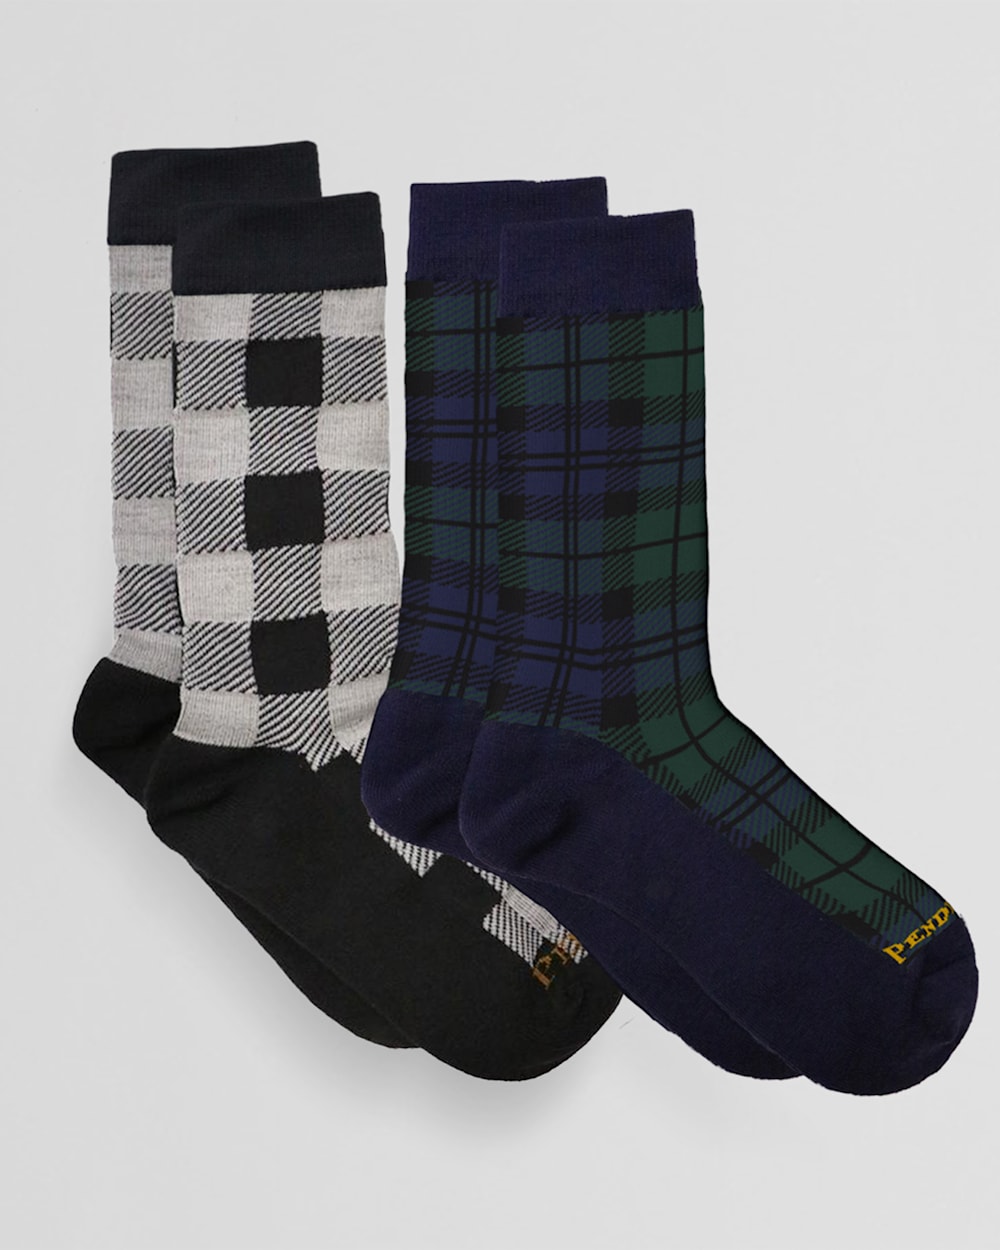 2-PACK PLAID SOCKS IN ROB ROY WHITE/BLACKWATCH GREEN image number 1